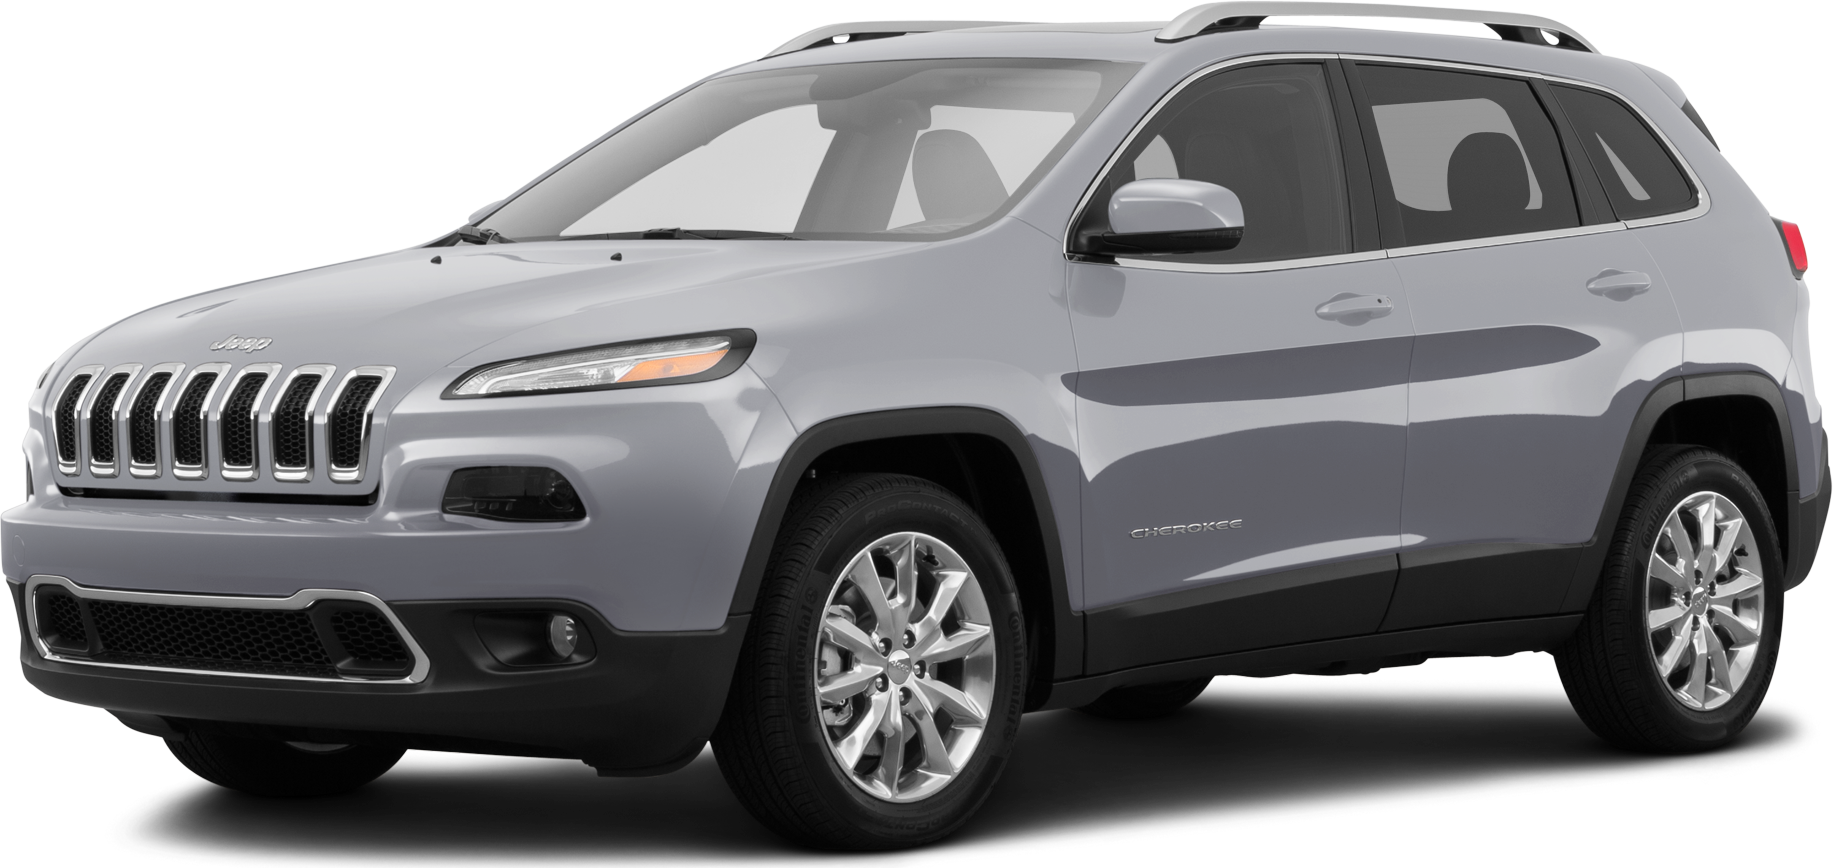 15 Jeep Cherokee Price Kbb Value Cars For Sale Kelley Blue Book